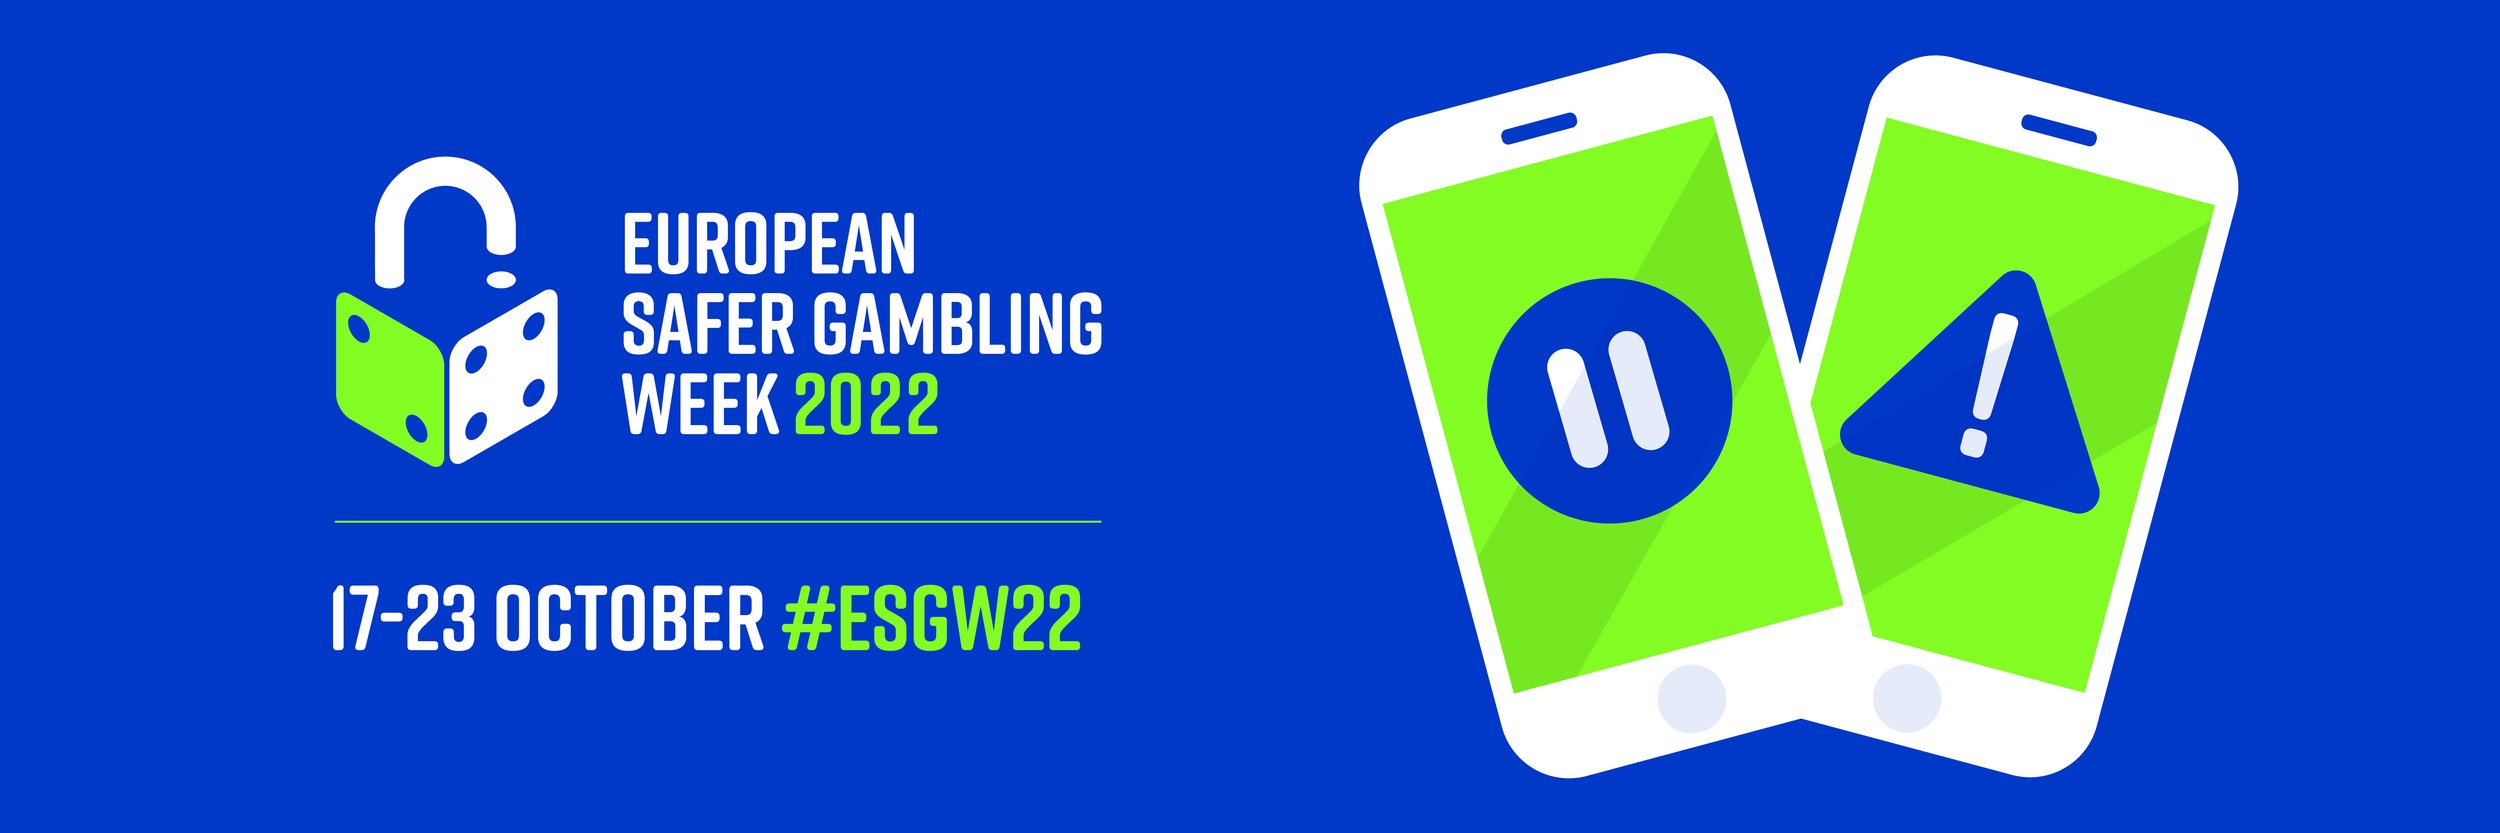 EGBA - European Gaming and Betting Association